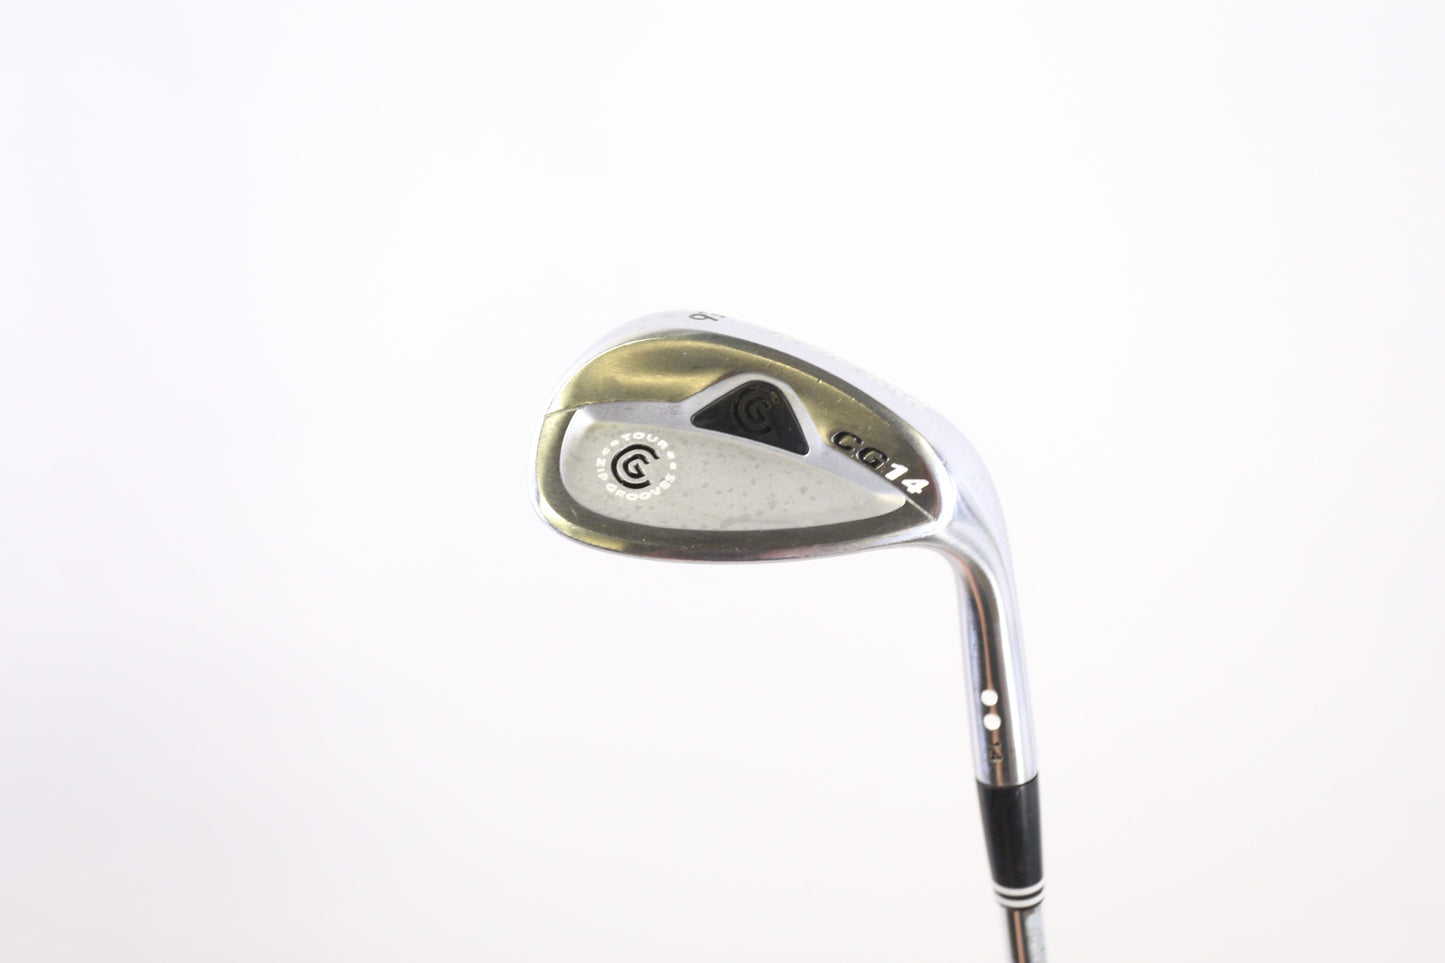 Used Cleveland CG14 Satin Chrome Tour Zip Sand Wedge - Right-Handed - 56 Degrees - Stiff Flex